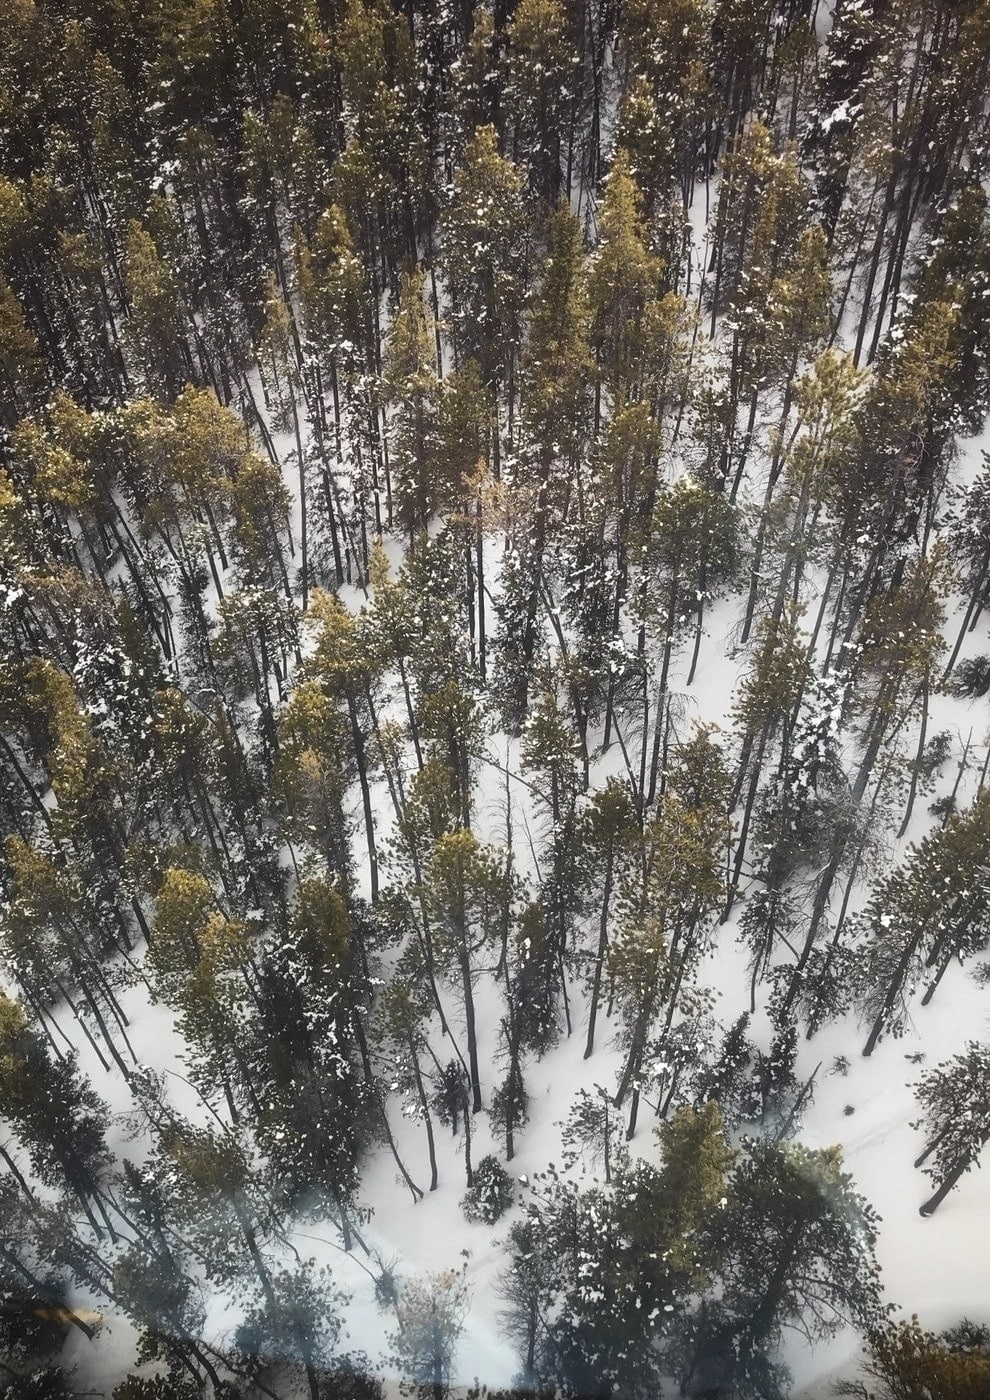 Looking down at the trees from the Sulphur Mountain gondola